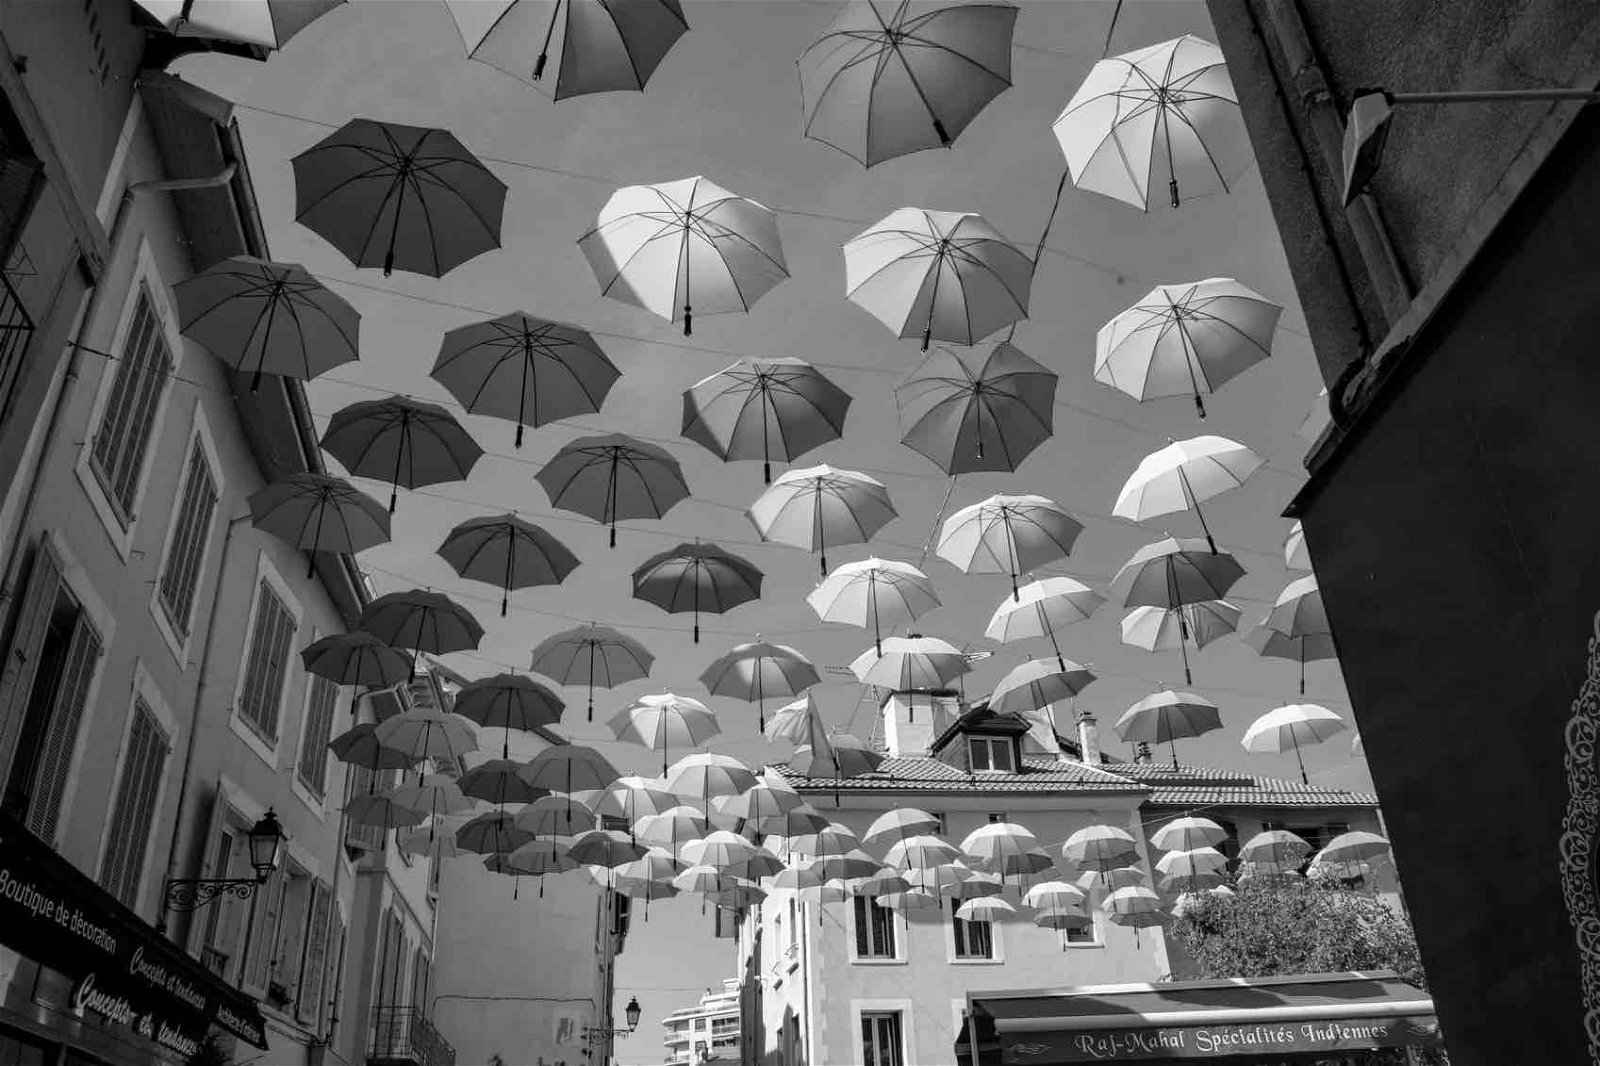 black and white street photo of umbrellas hanging in the sky.